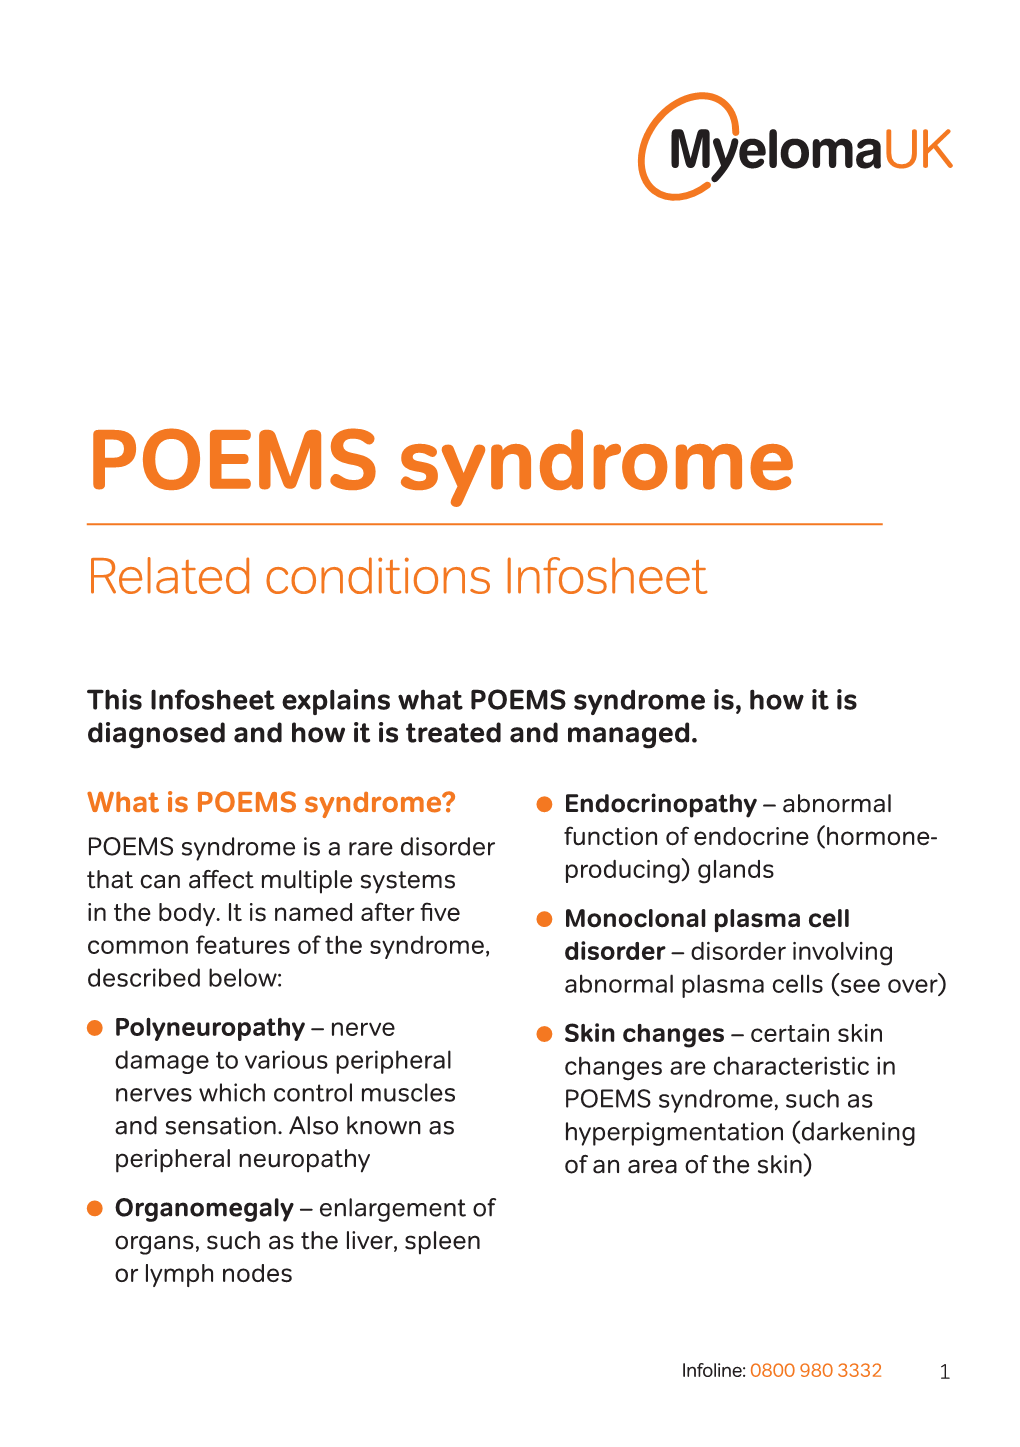 POEMS Syndrome Related Conditions Infosheet